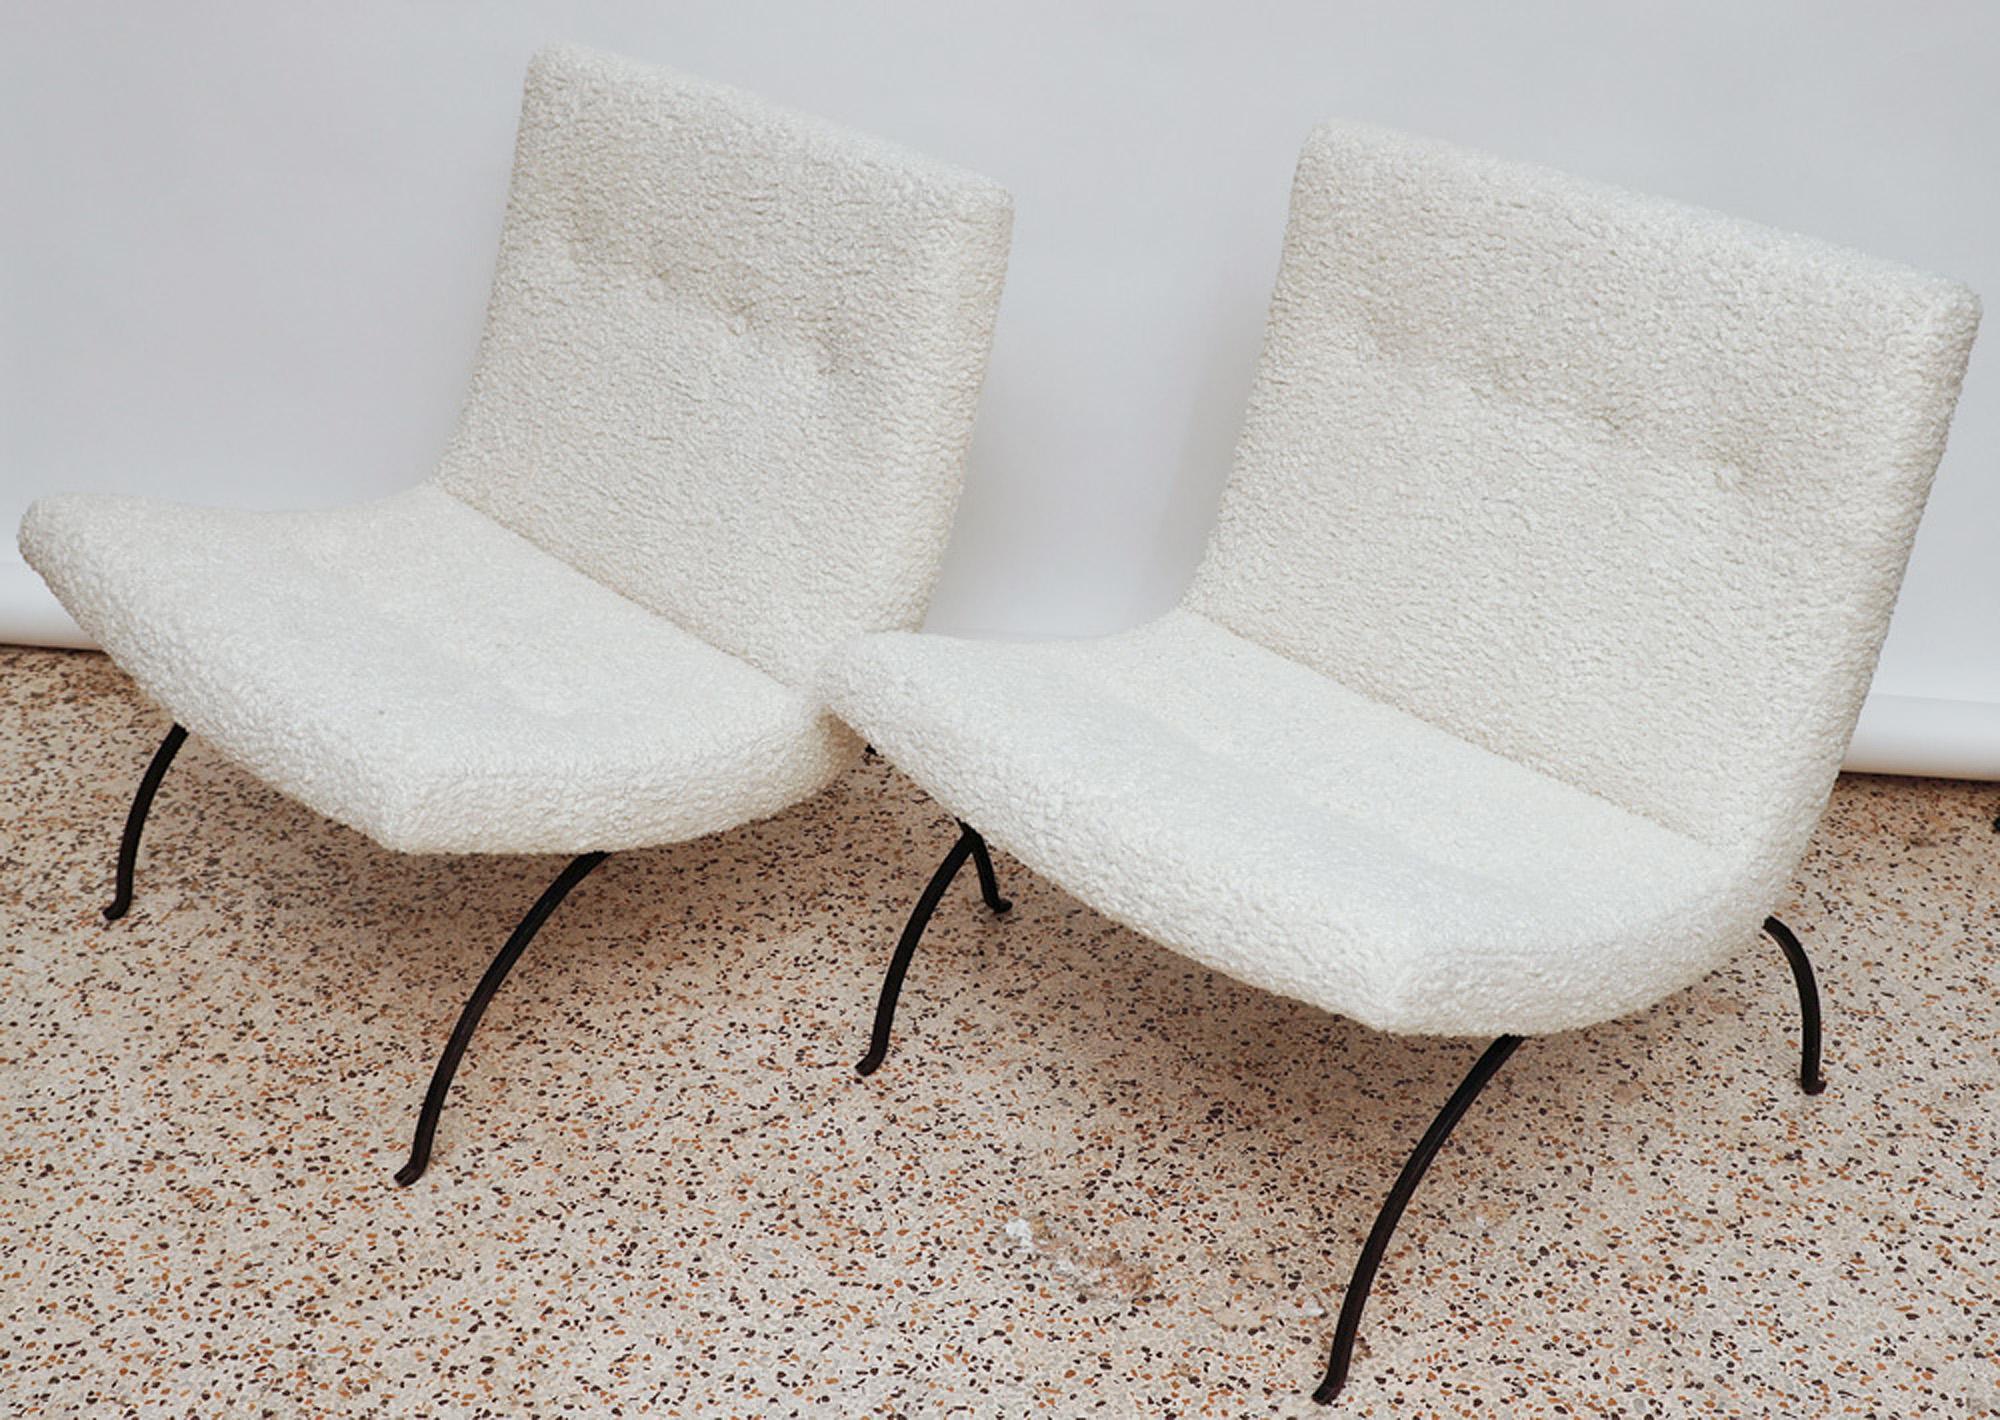 Pair of comfortable and stylish iron-framed Scoop lounge chairs designed by Milo Baughman for James Mfg., circa 1960, newly upholstered in comfy faux shearling. 

An iconic Mid-Century design!